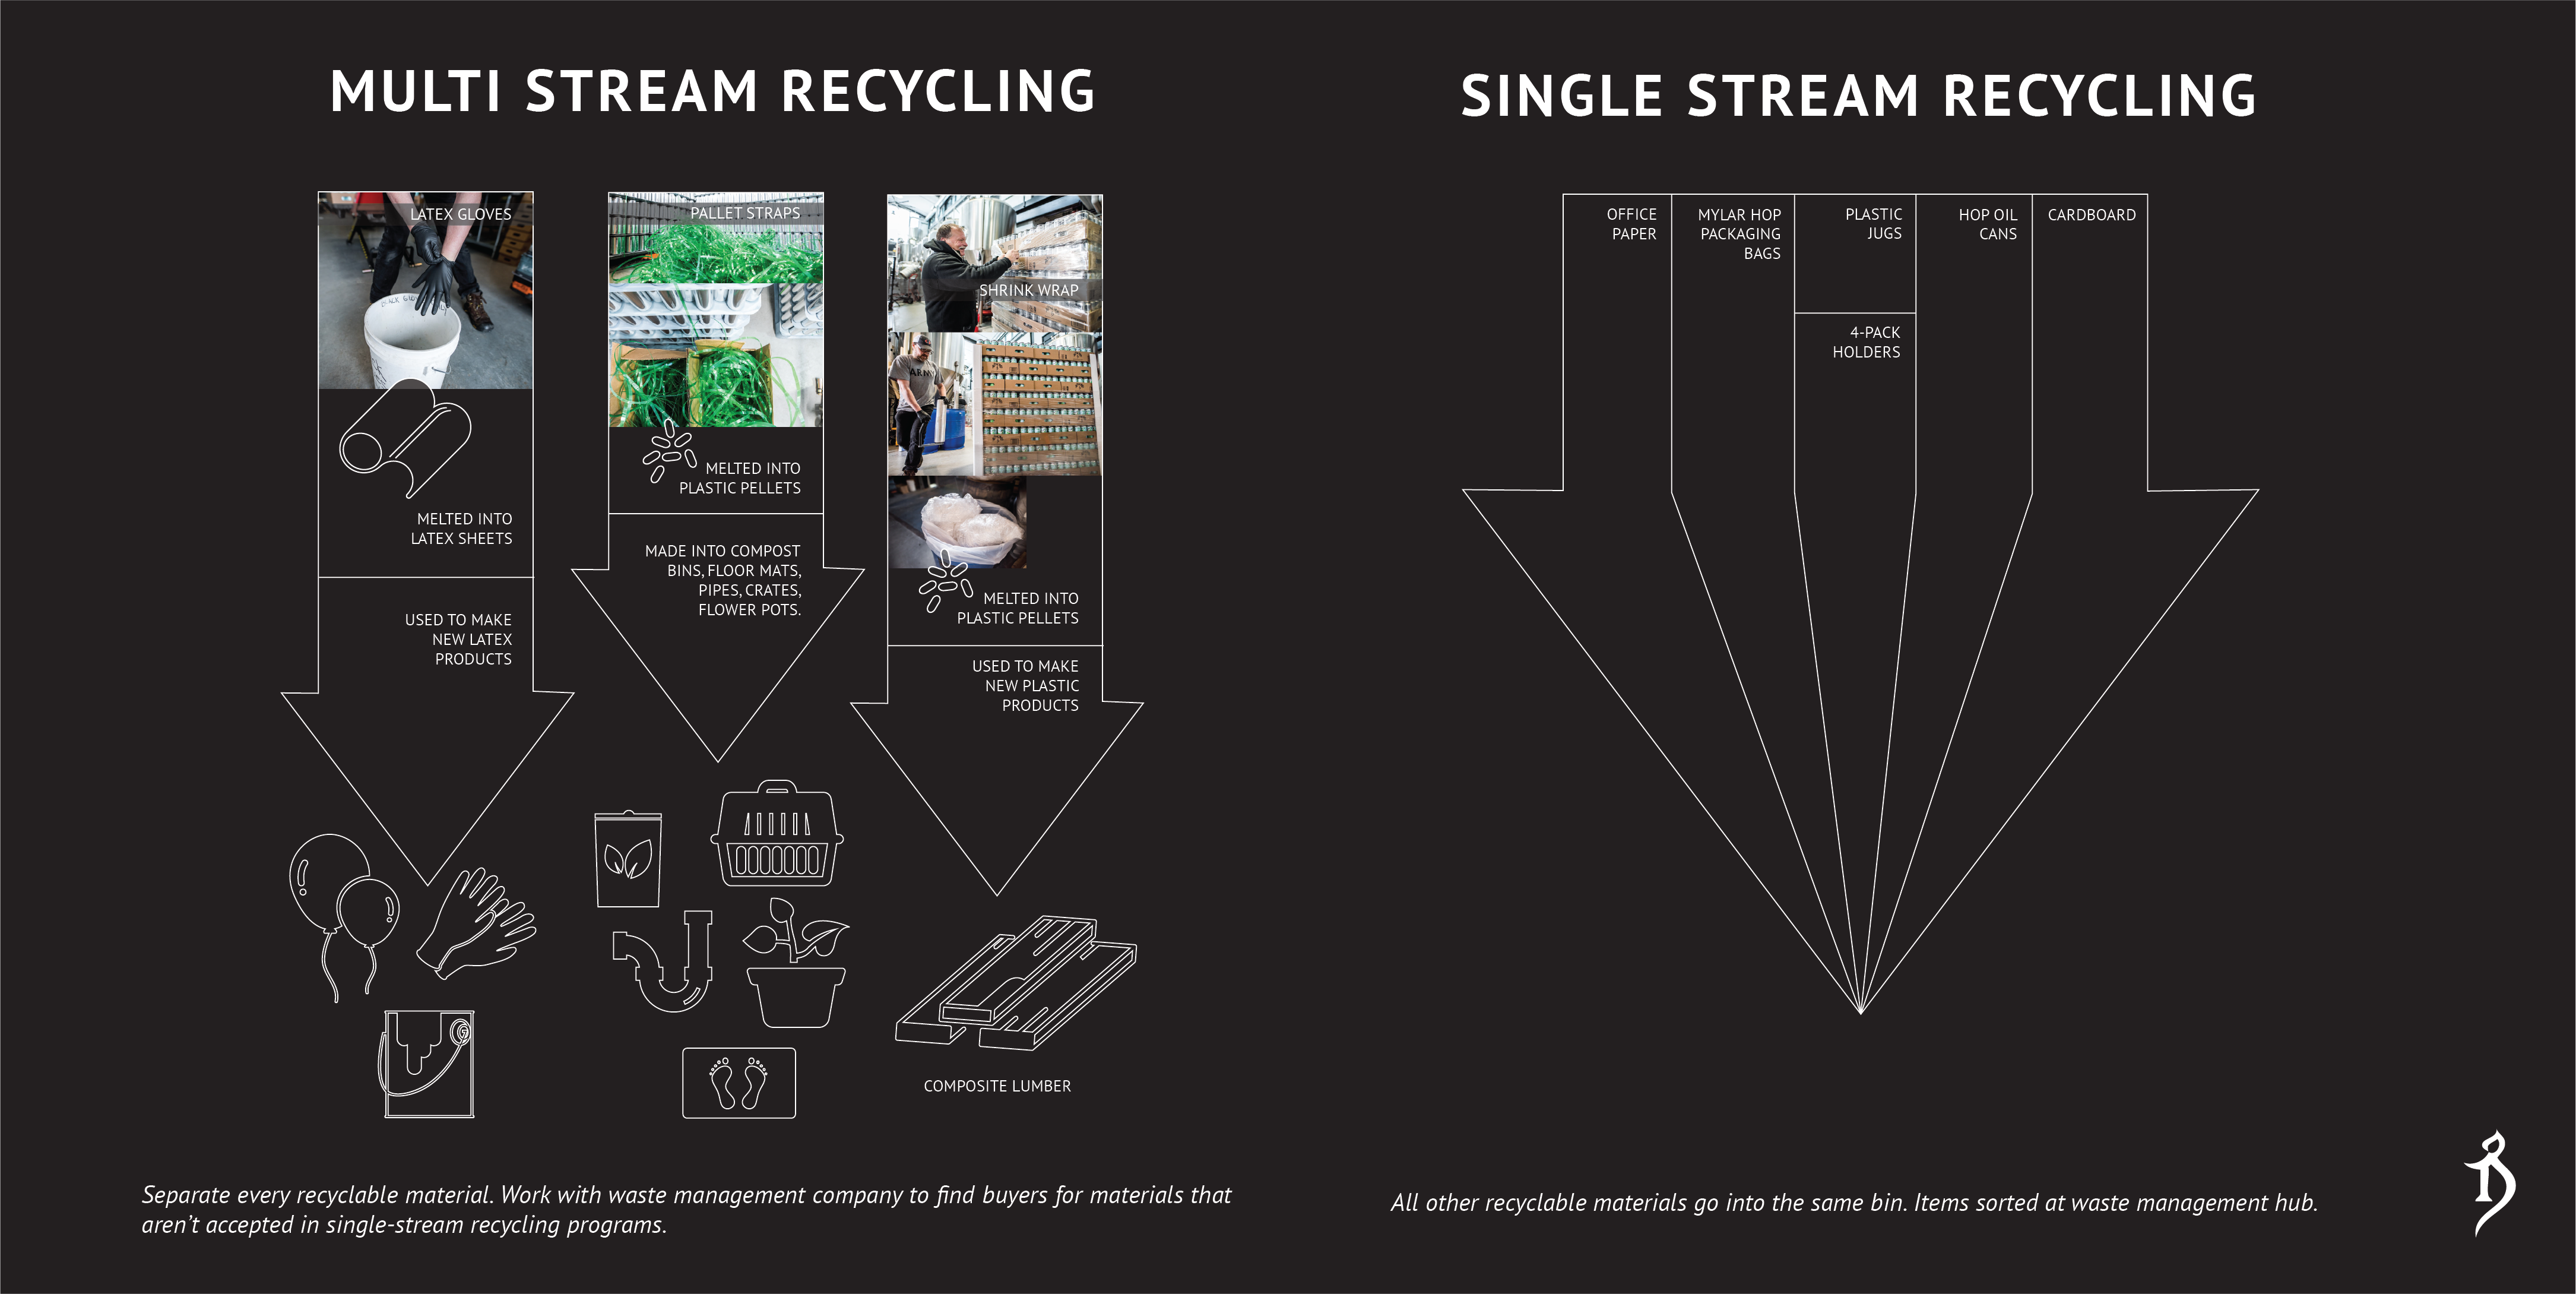 Recycling infographic, showing our multi-stream and single-stream recycling efforts.